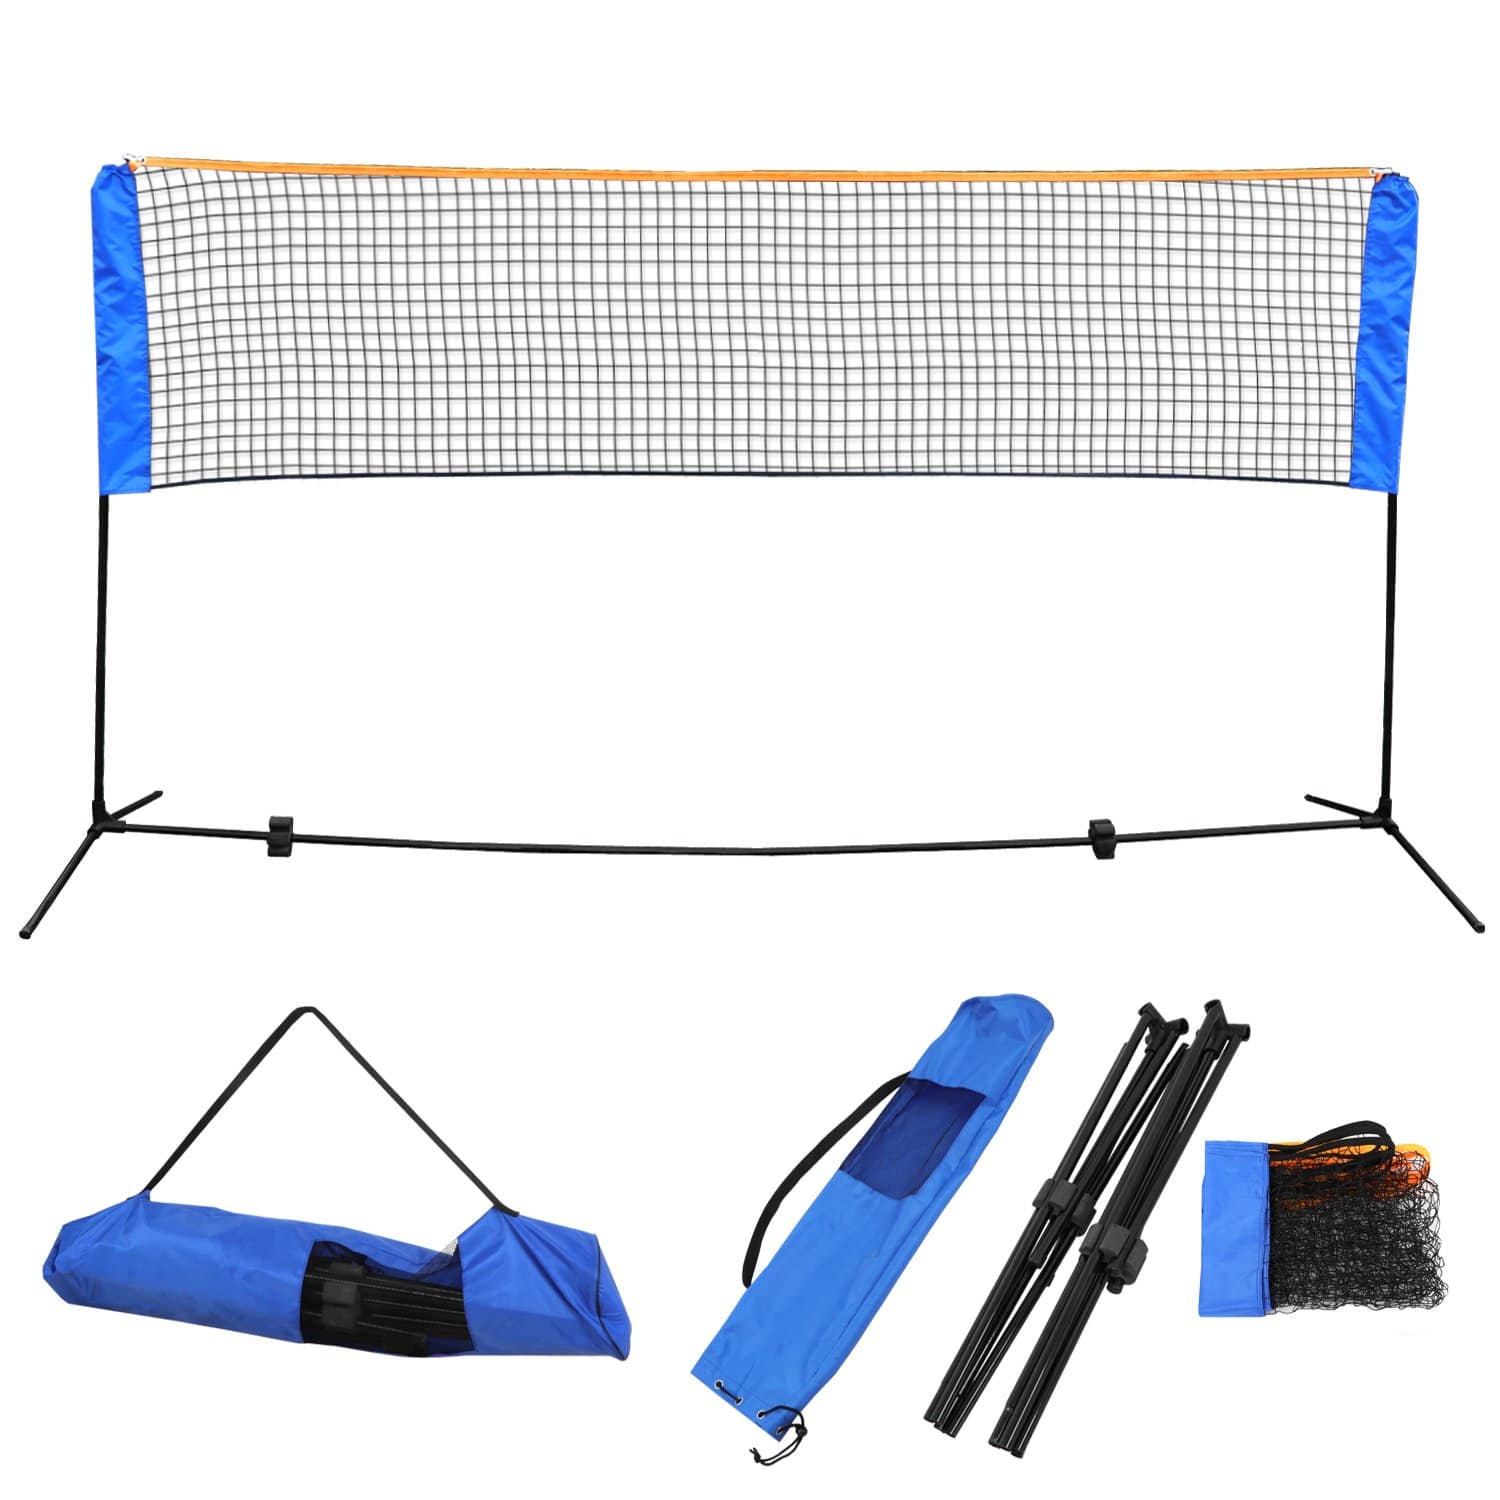 ZENY 10 Ft x 5 Ft High Portable Volleyball Net Set w/Poles